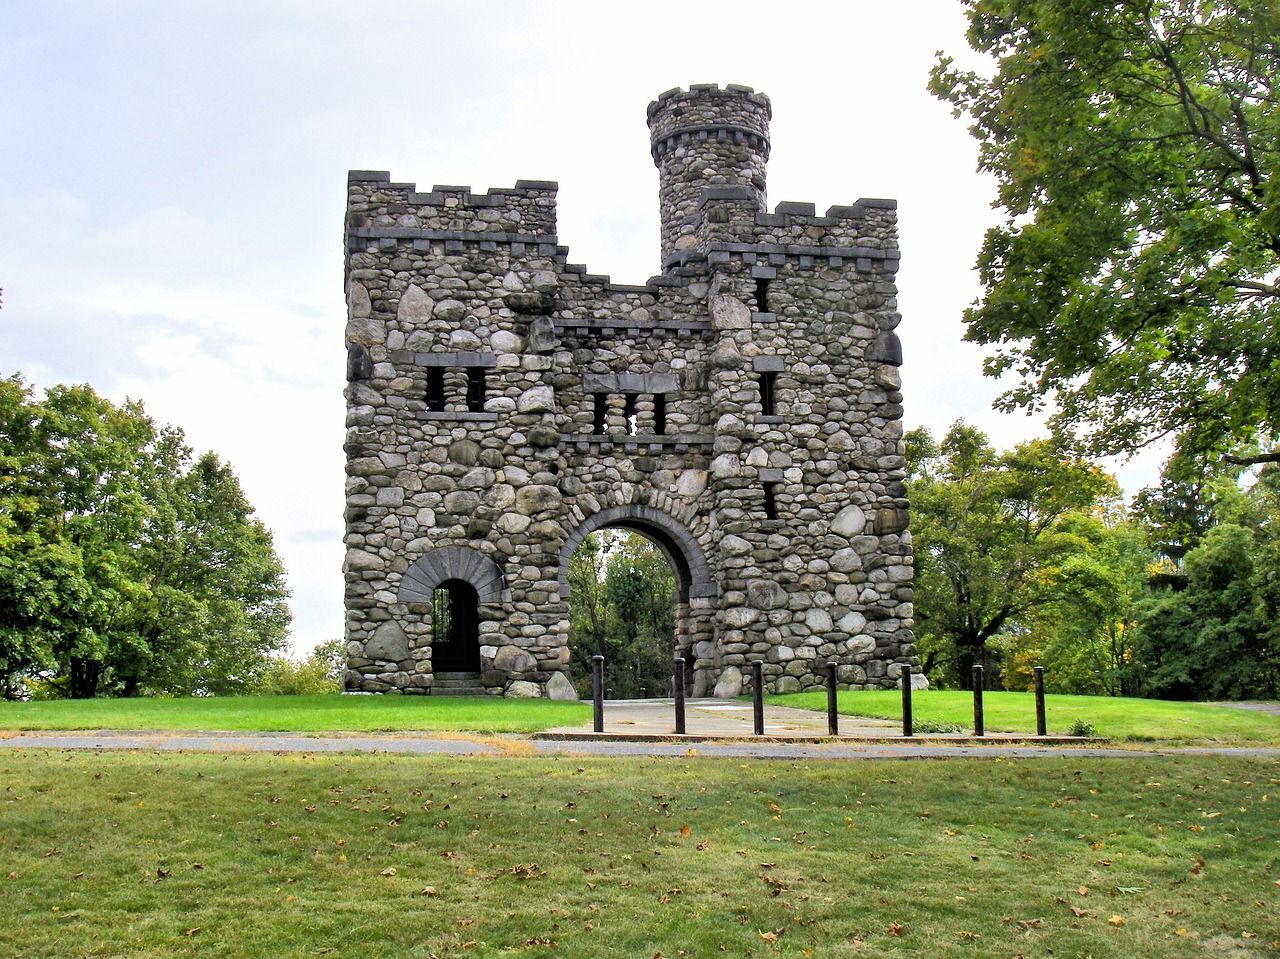 Bancroft Tower located in Salisbury Park in Worcester.